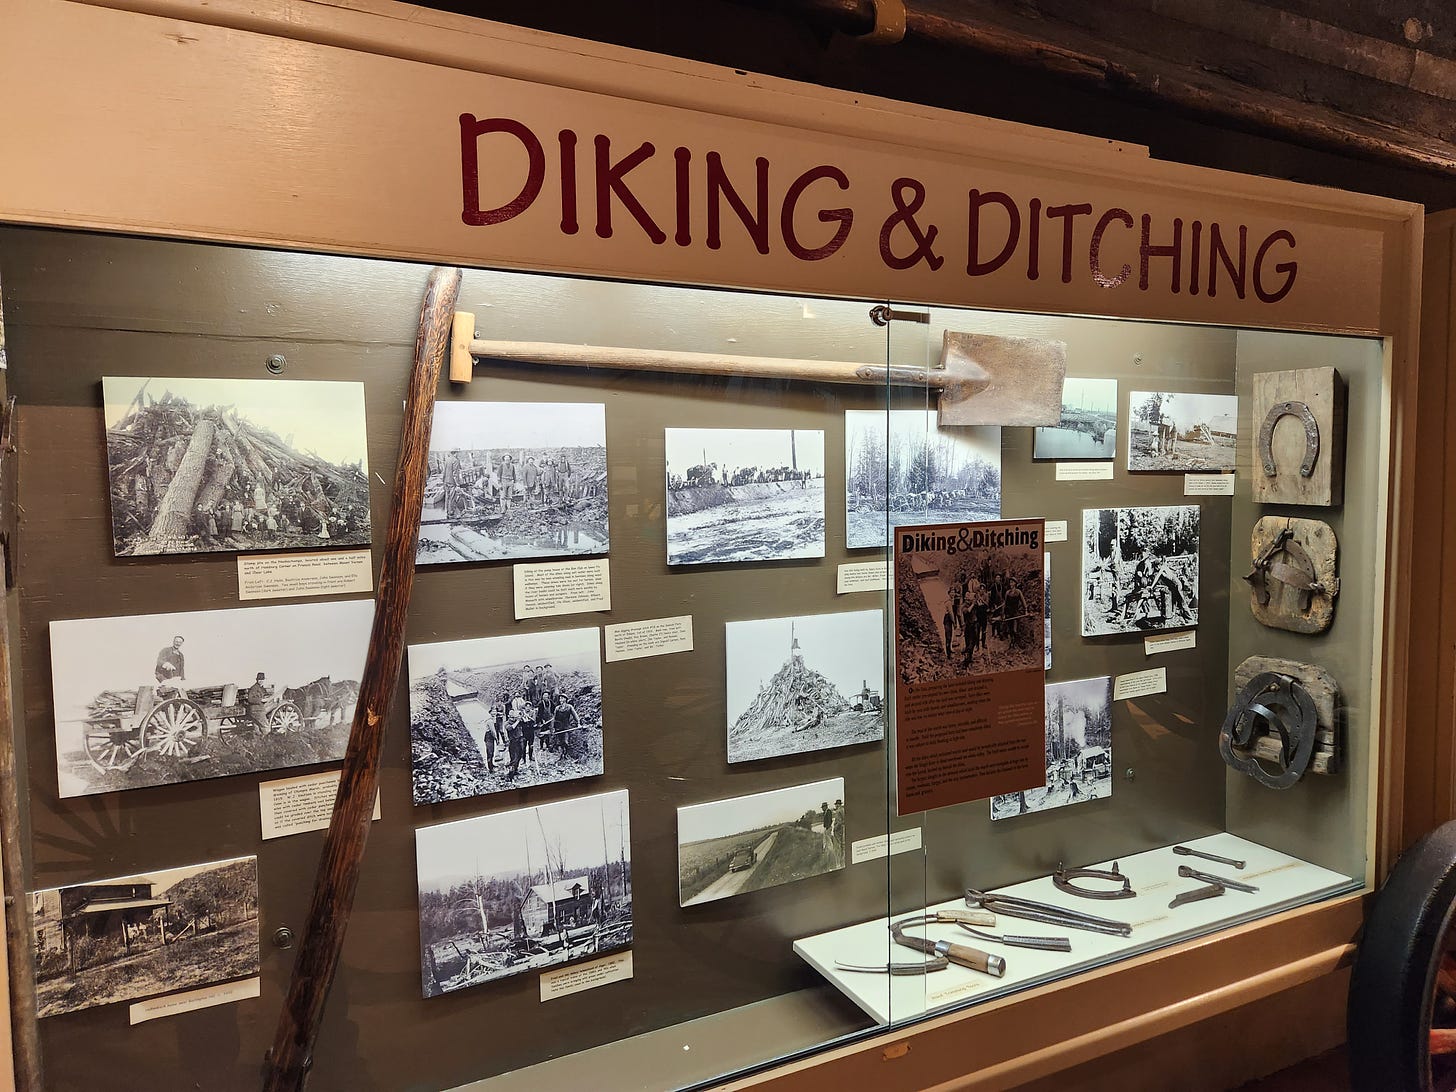 museum display with tools and photos about diking and draining the land